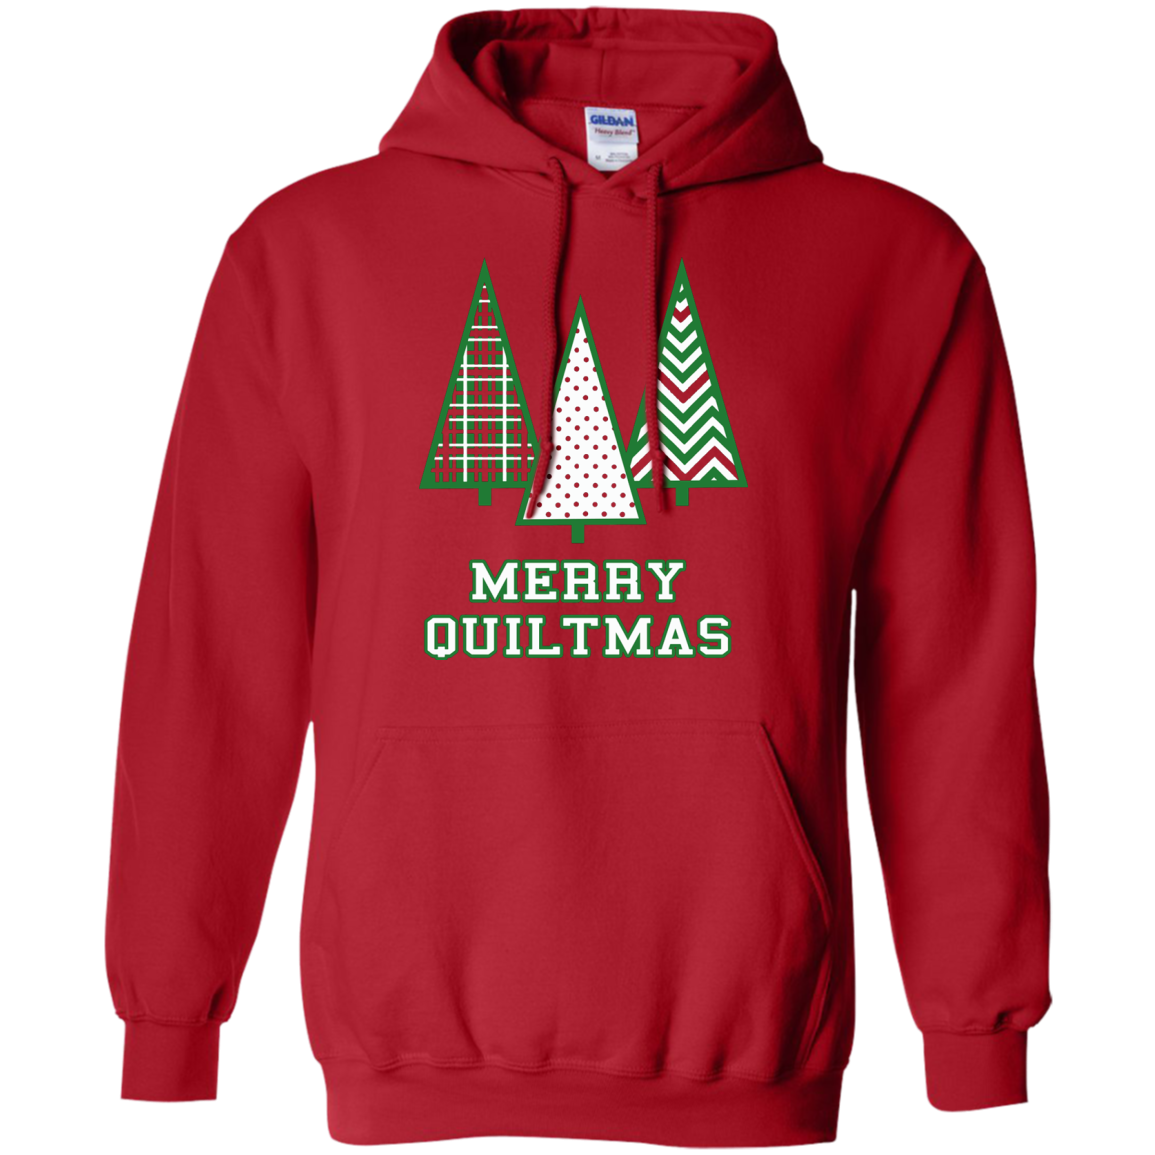 Merry Quiltmas Pullover Hoodie